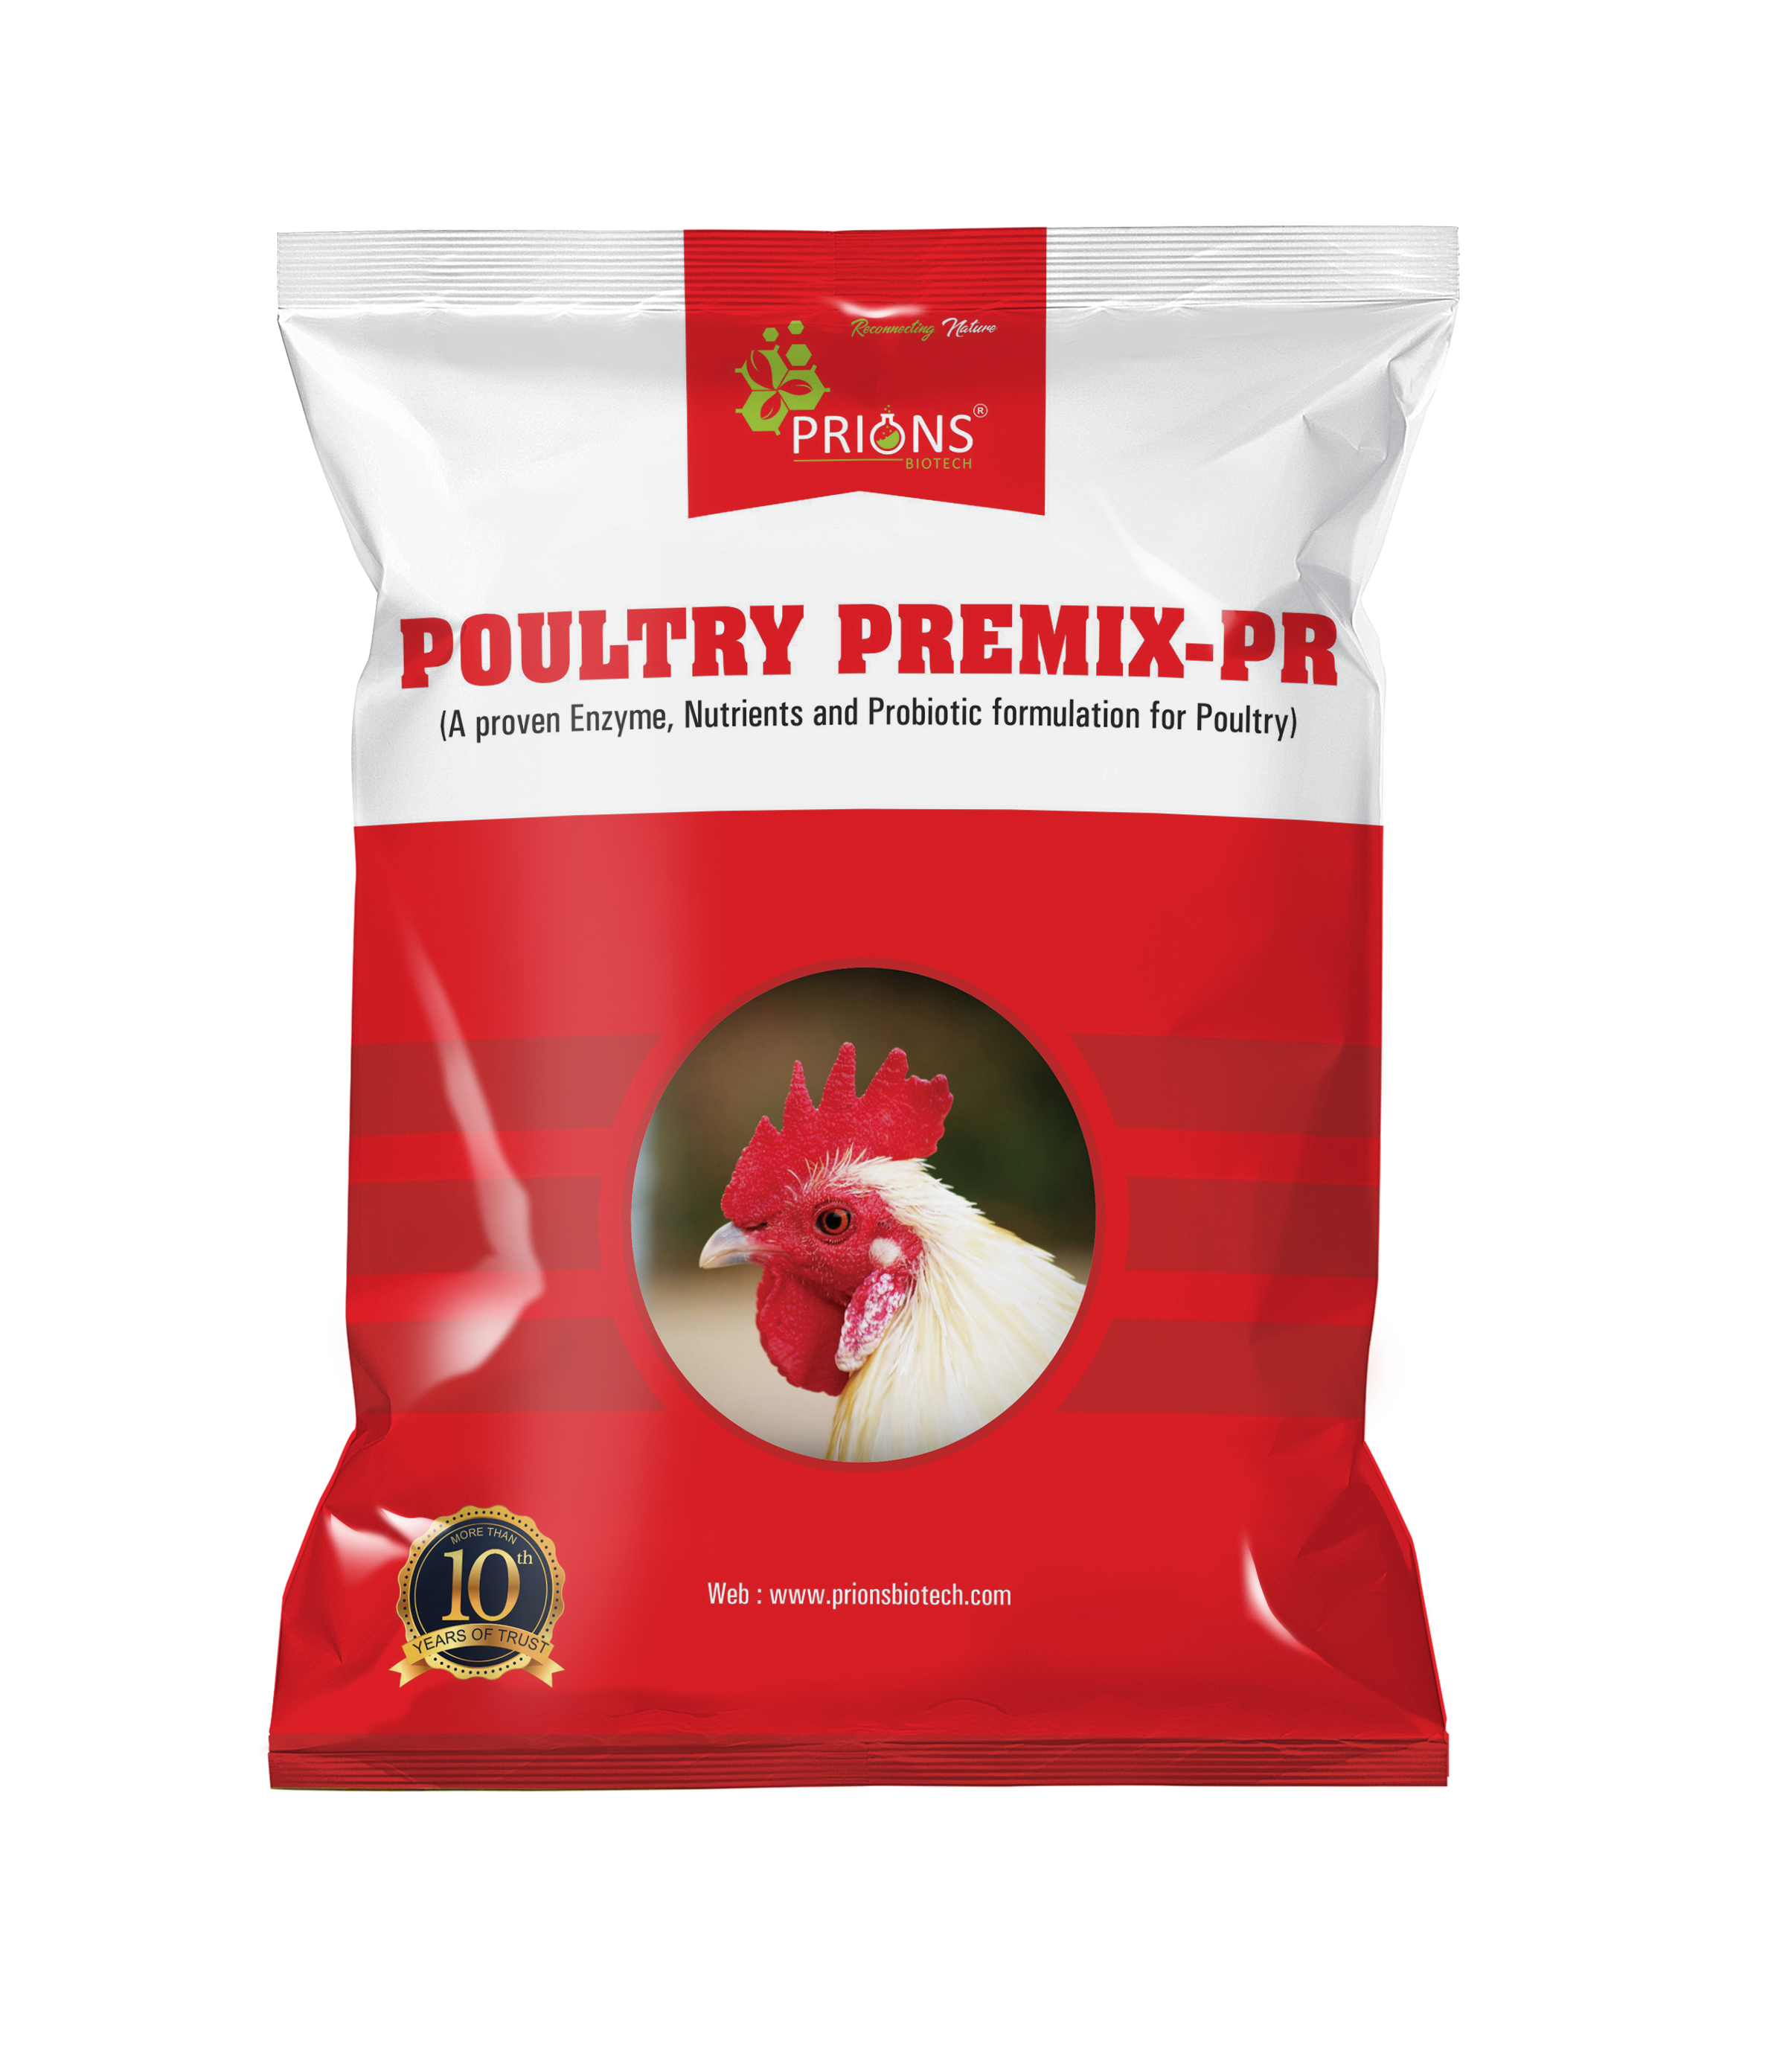 Enzyme, Nutrients, and Probiotic Formulation for Poultry